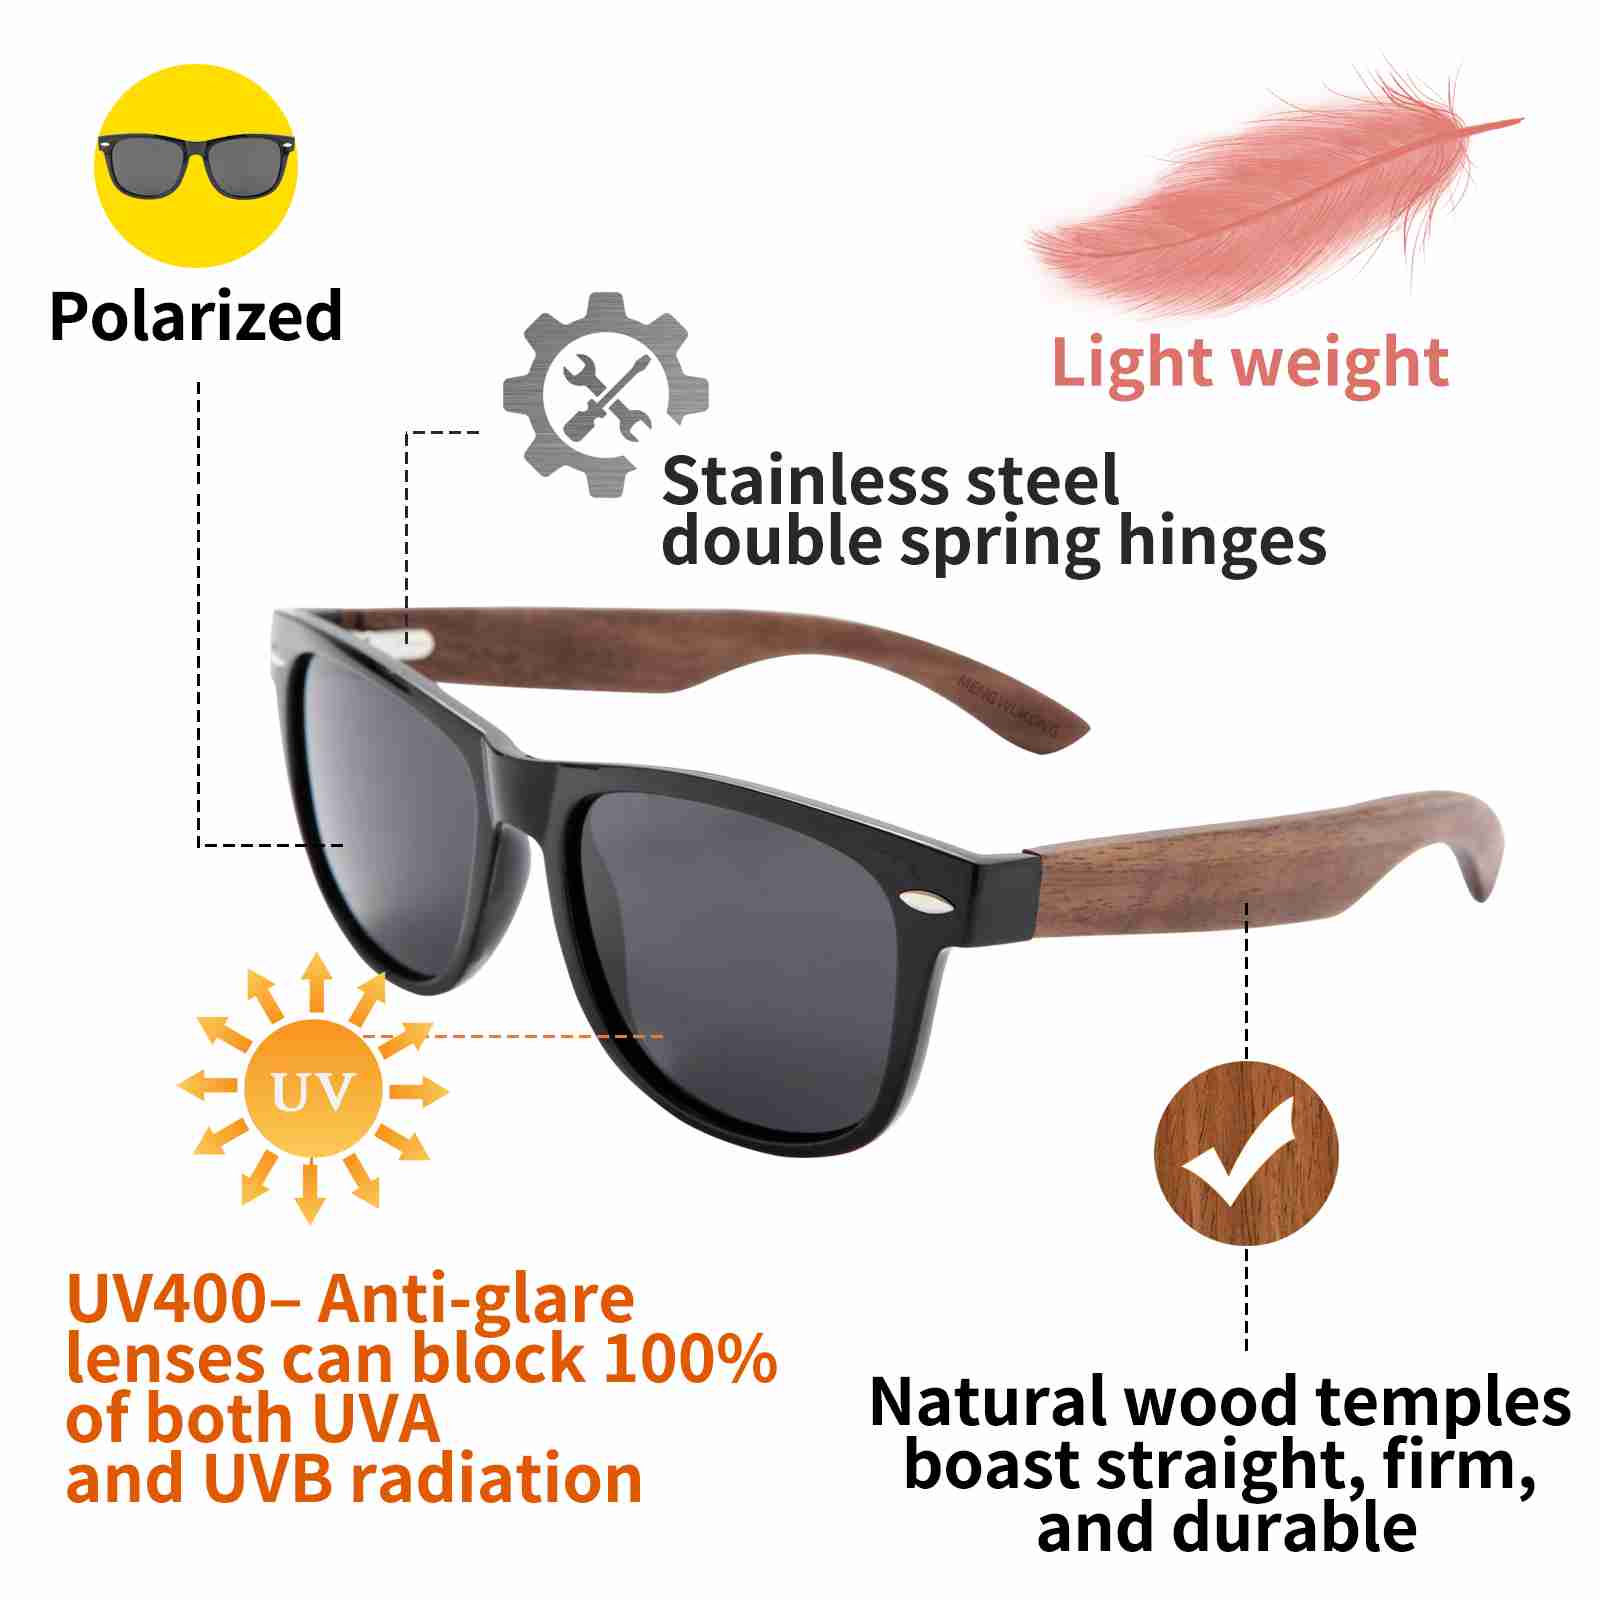 sunglasses with discount code